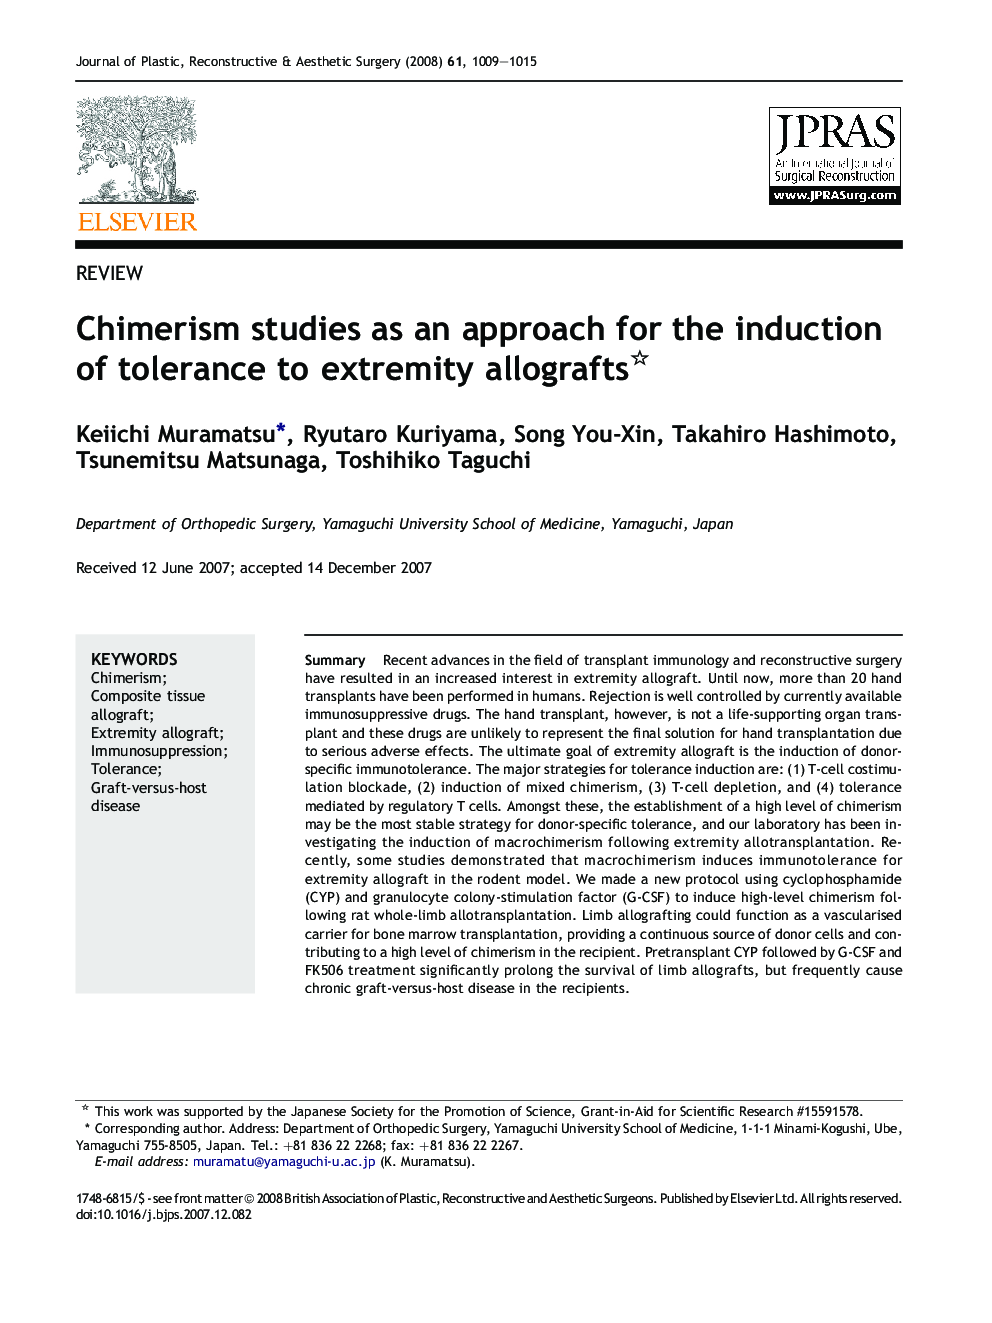 Chimerism studies as an approach for the induction of tolerance to extremity allografts 